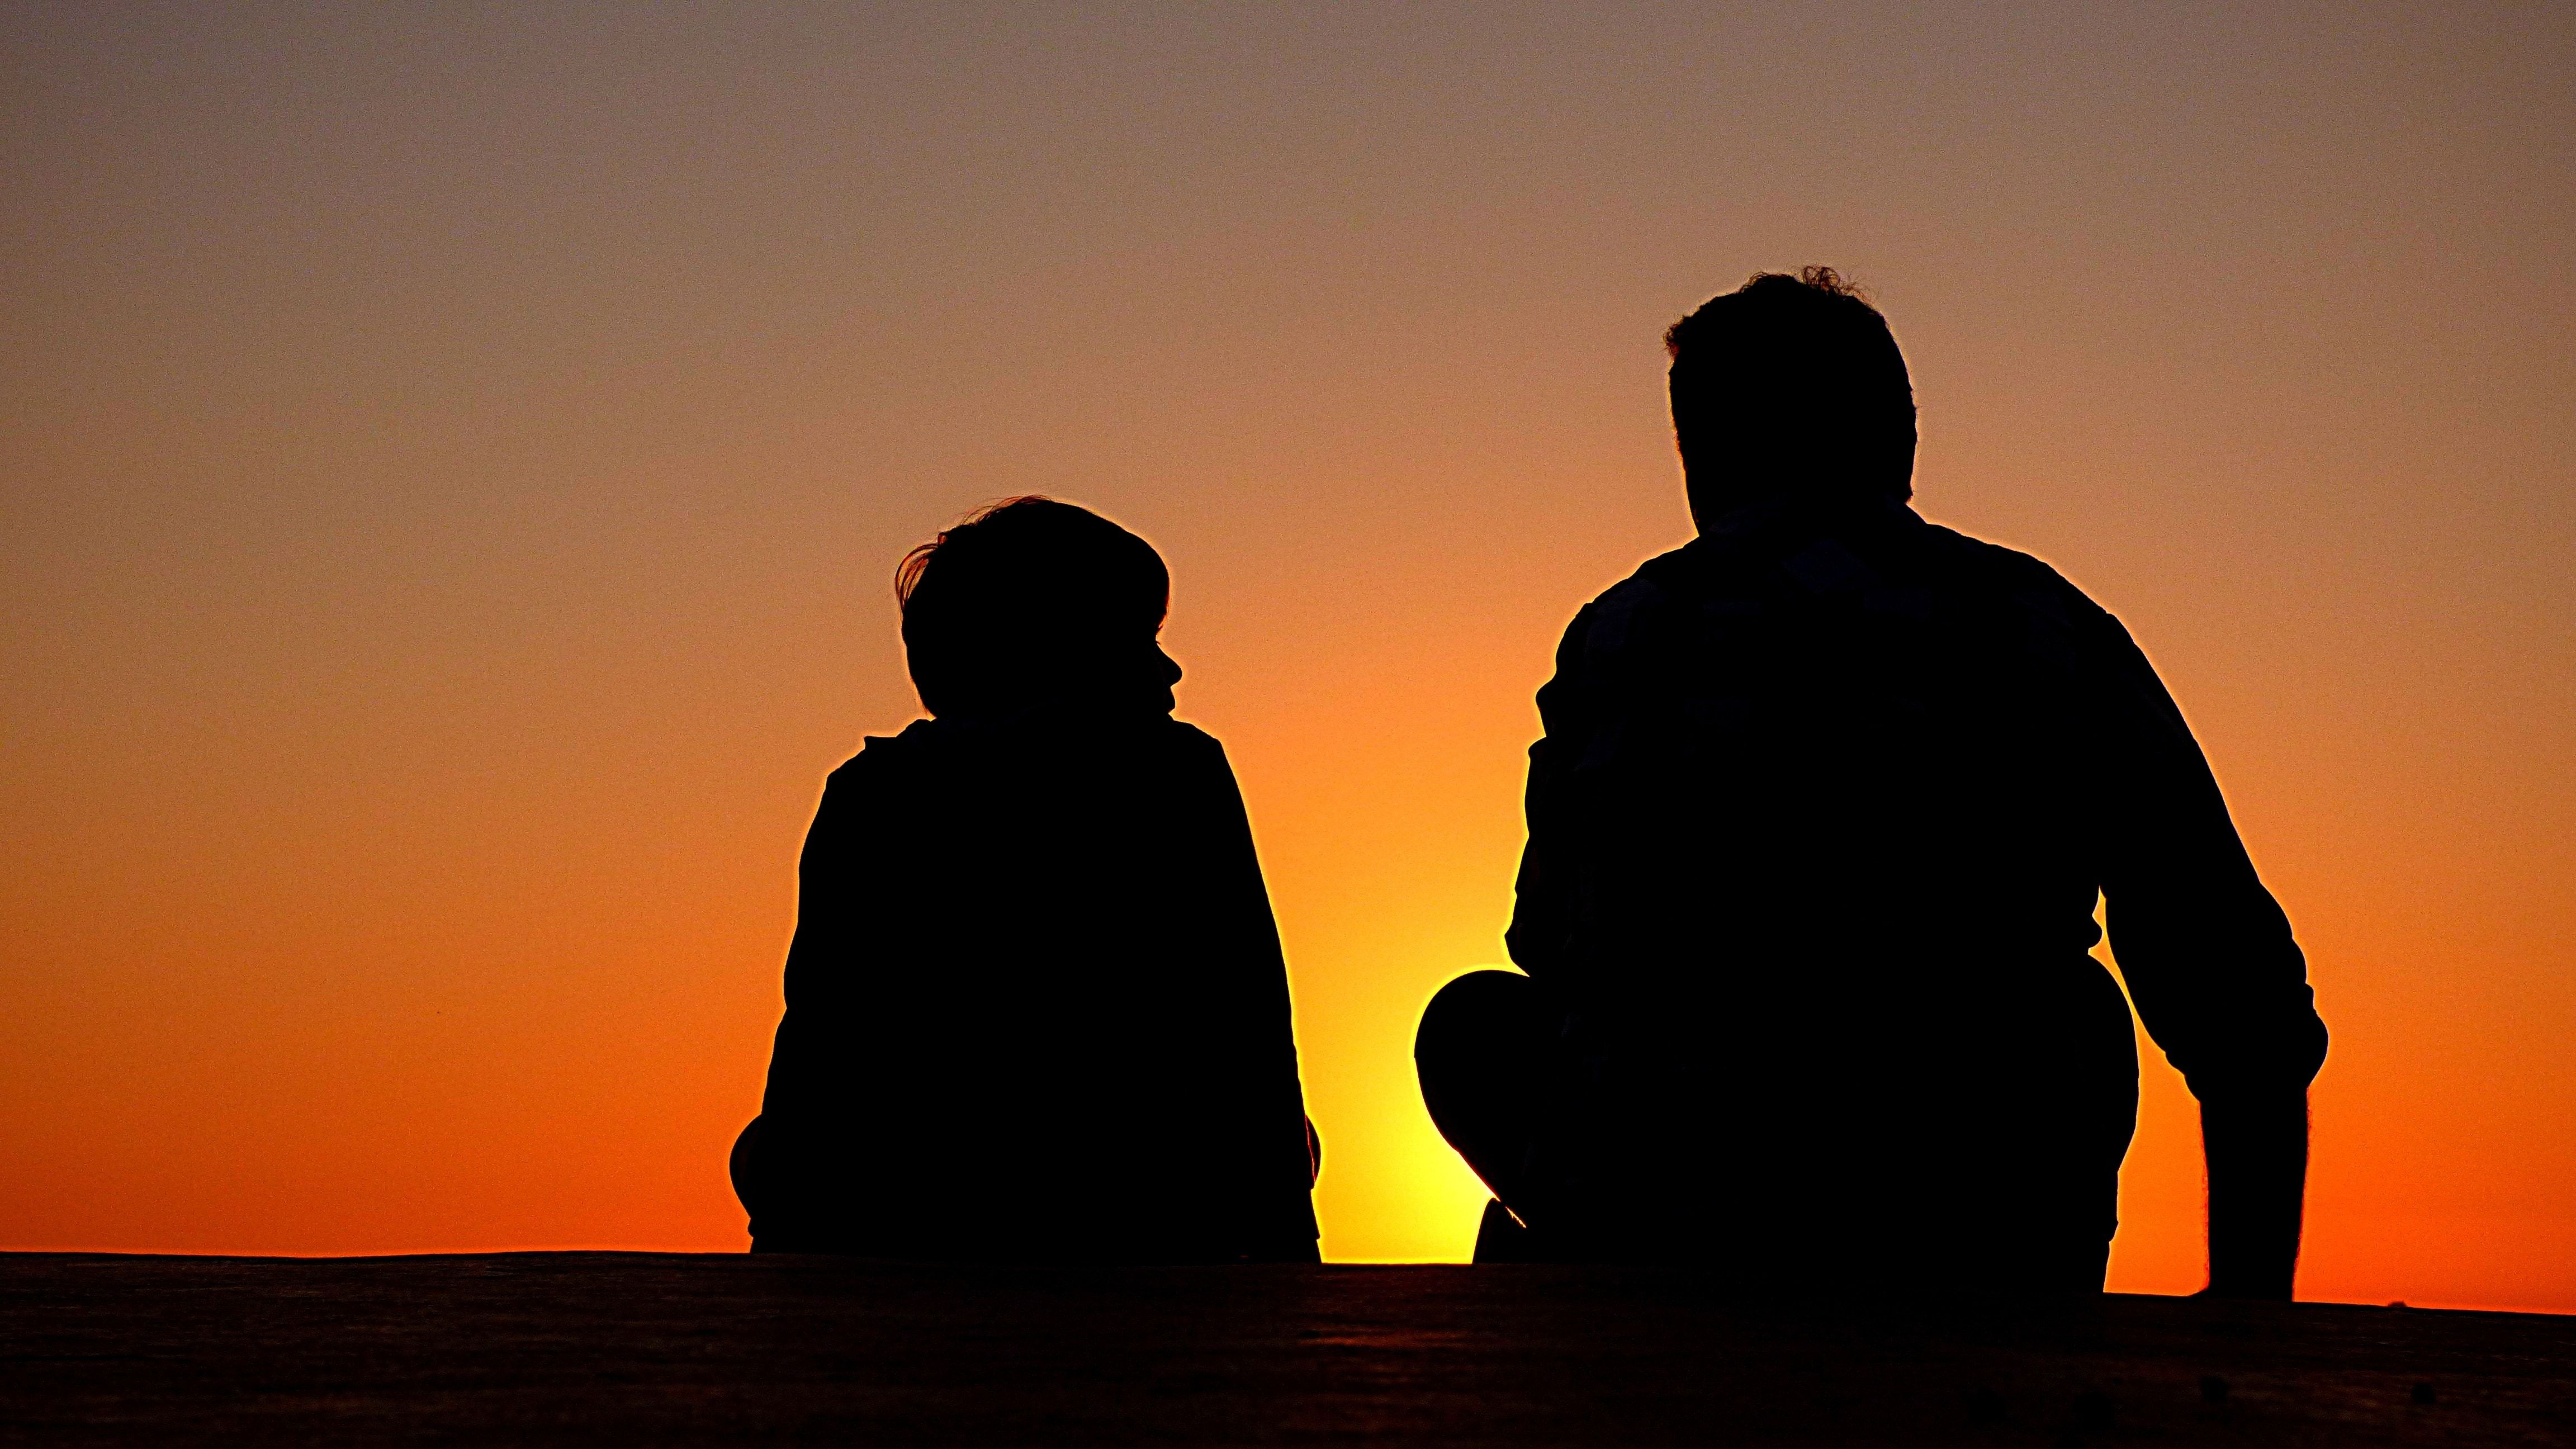 silhouette of boy and man sitting facing sunset free image